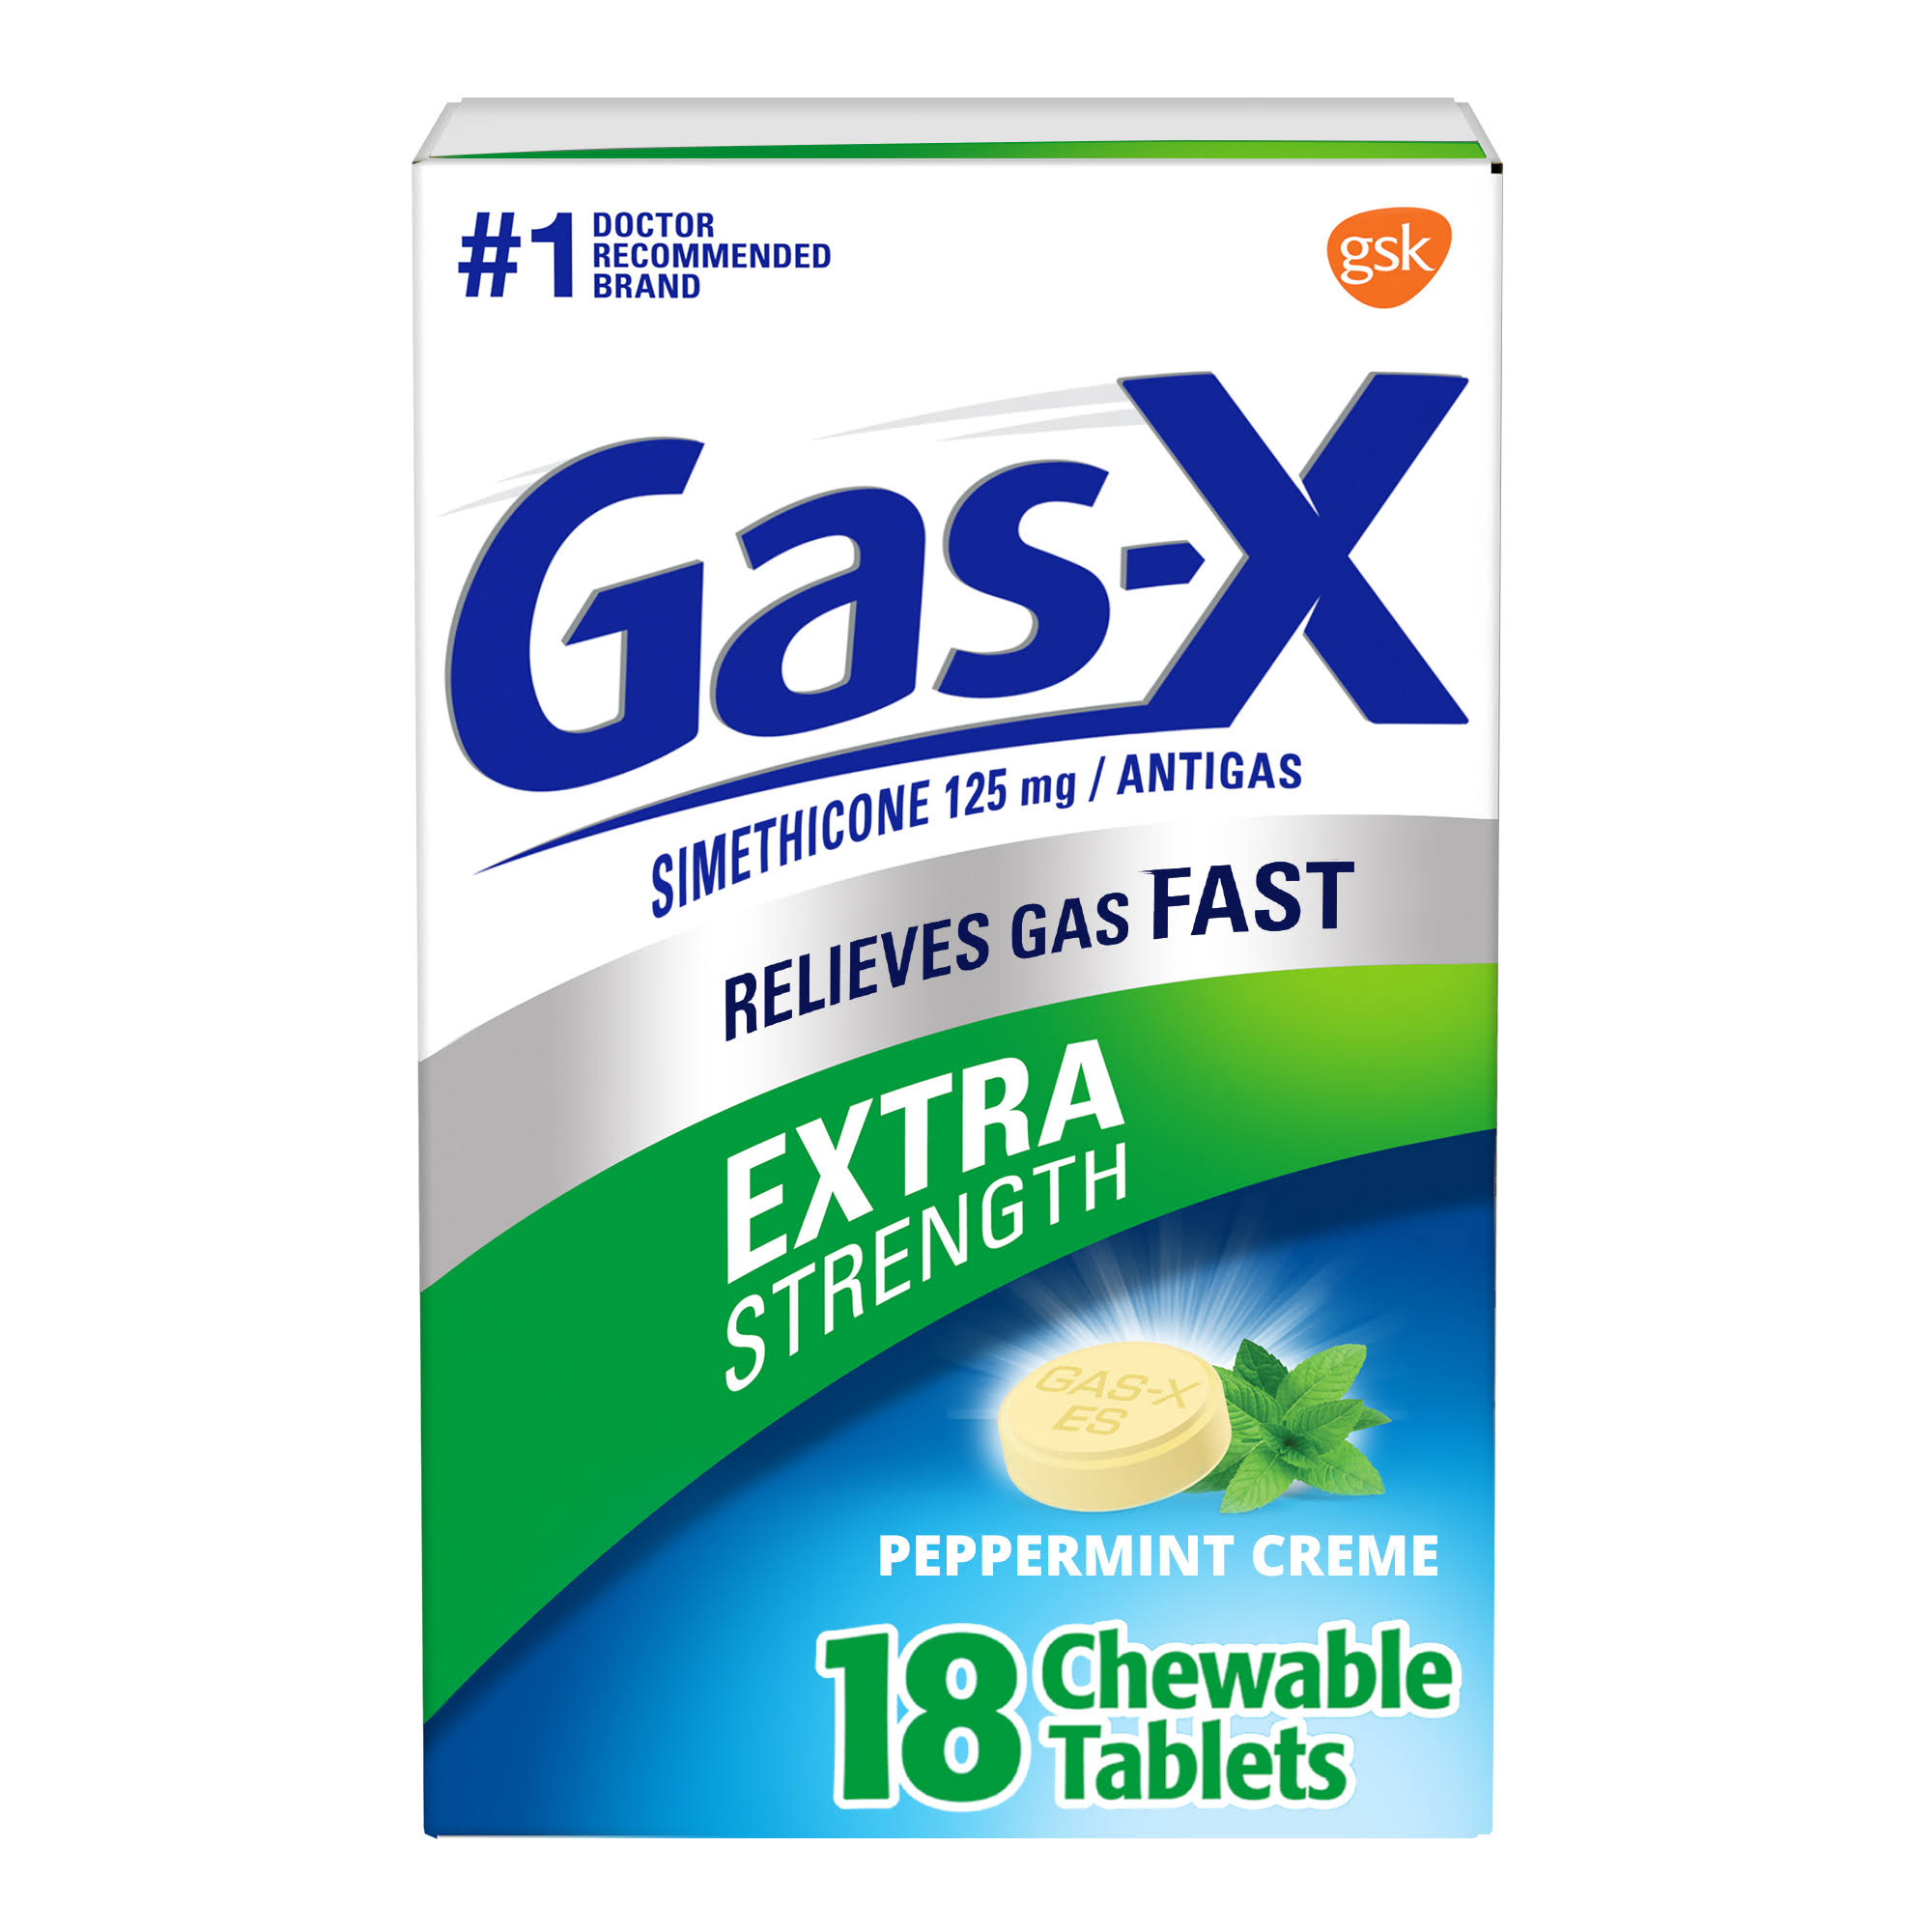 Gas X Chewable Extra Strength Tablets - Peppermint Creme, 18ct